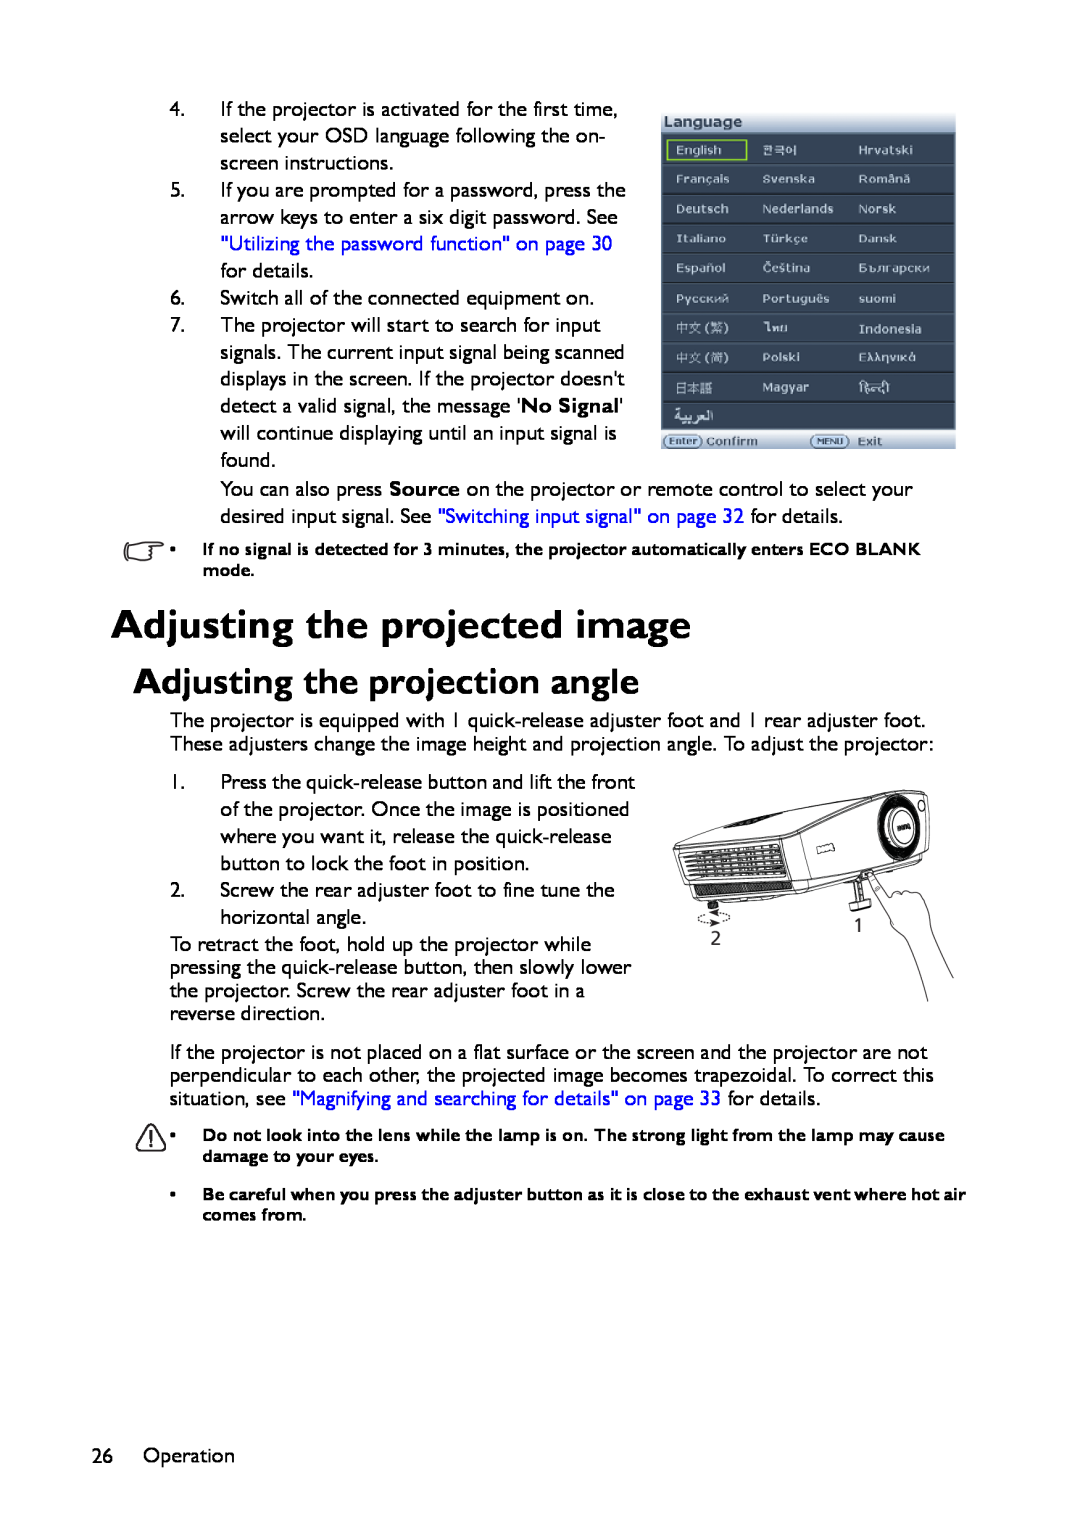 BenQ MX661 user manual Adjusting the projected image, Adjusting the projection angle 